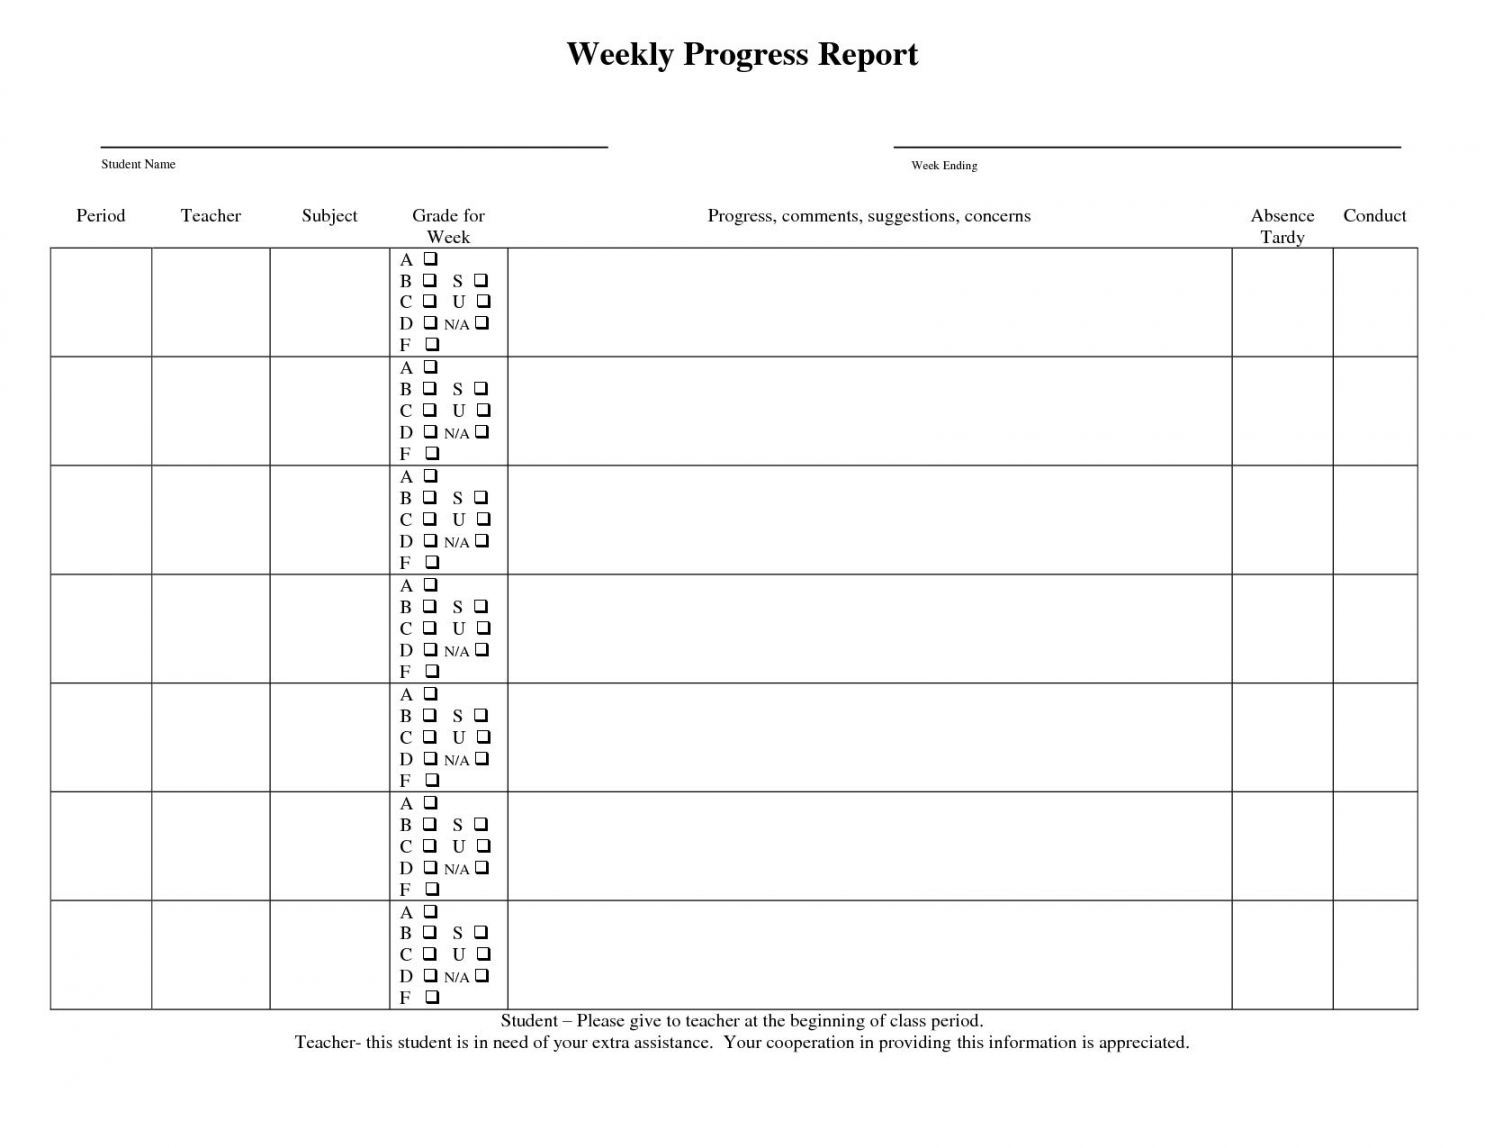 Daily Progress Report Format Excel Construction Glendale Throughout Student Progress Report Template